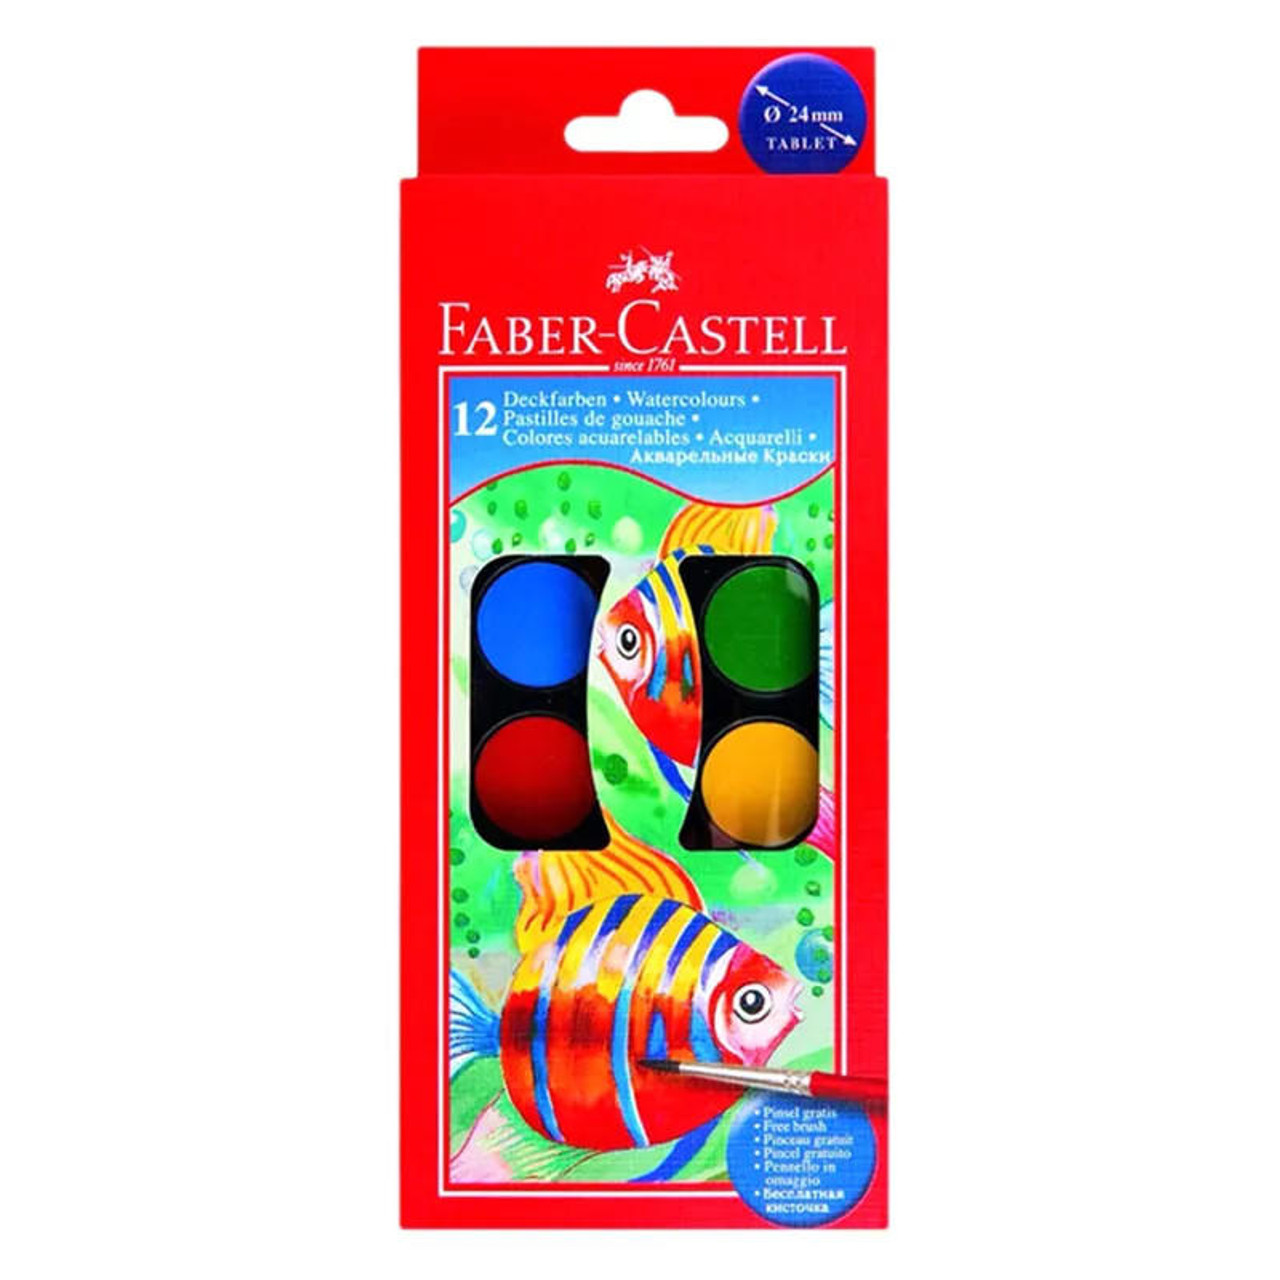 Faber-Castell DuoTip Washable Markers, 12-Markers - Sam Flax Atlanta